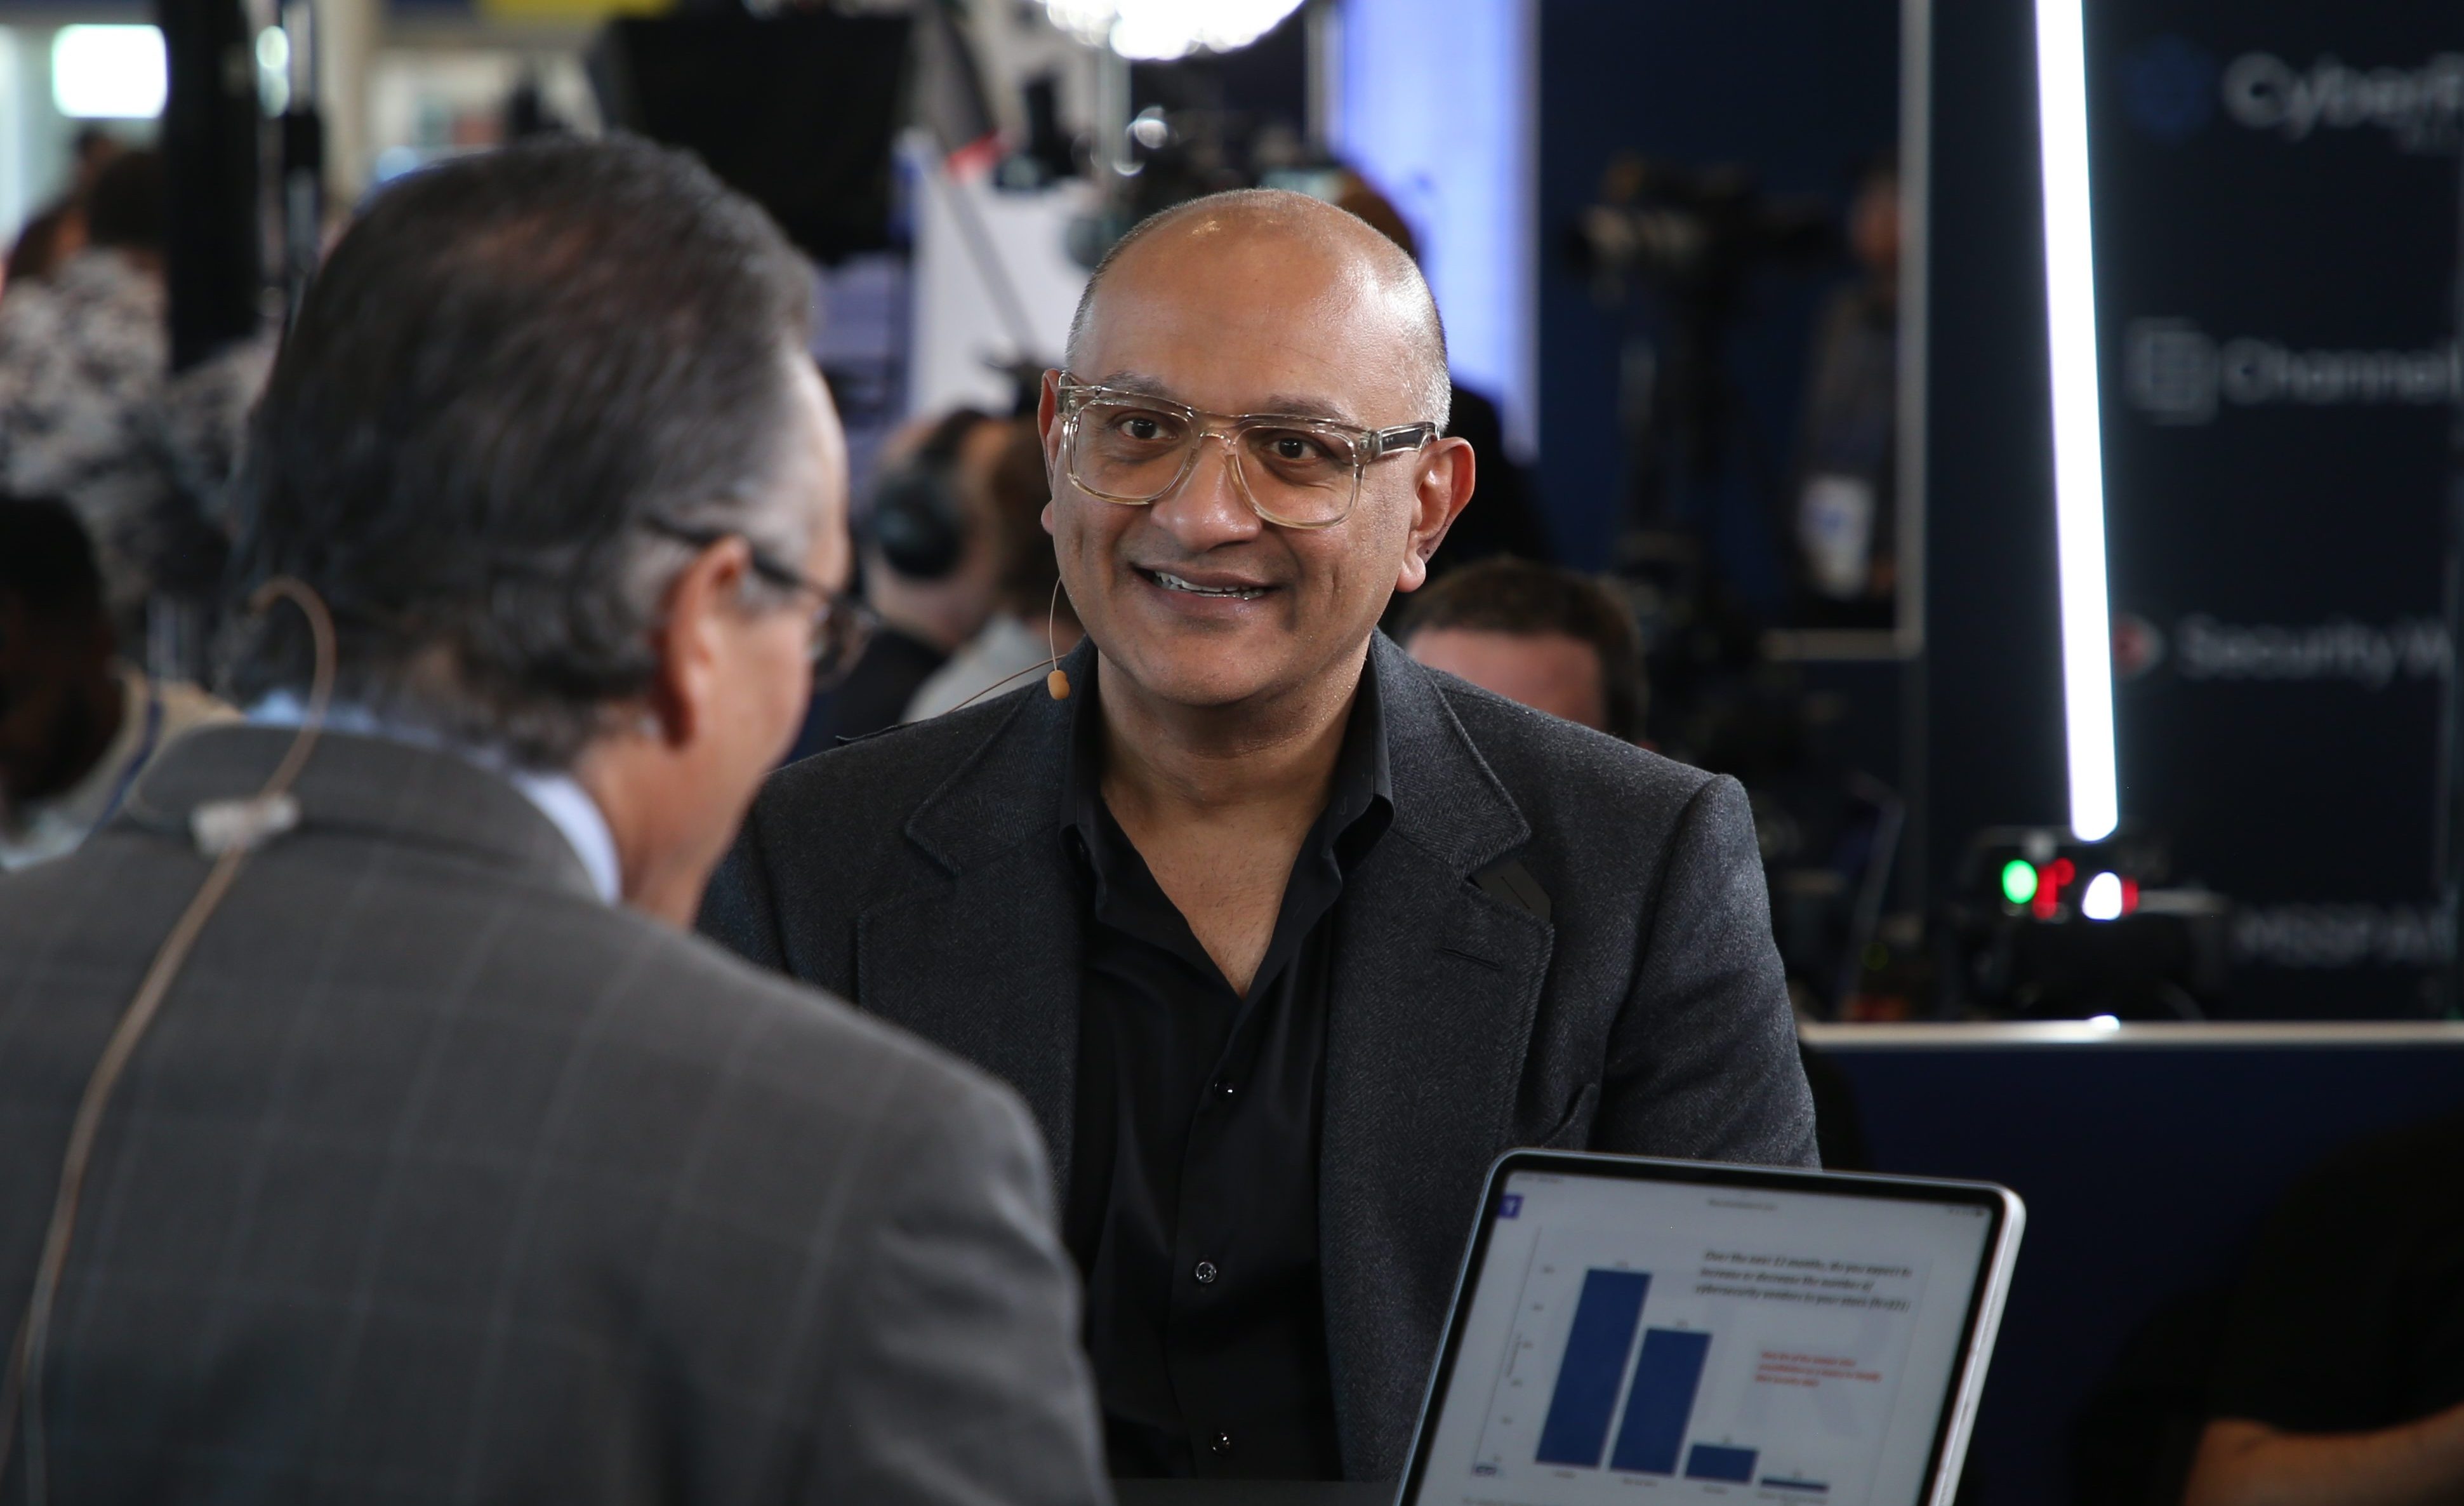 Jeetu Patel, executive vice president and general manager of security and collaboration at Cisco Systems Inc., talks with theCUBE during RSA Conference about how Cisco Hypershield offers next-gen cybersecurity solutions.